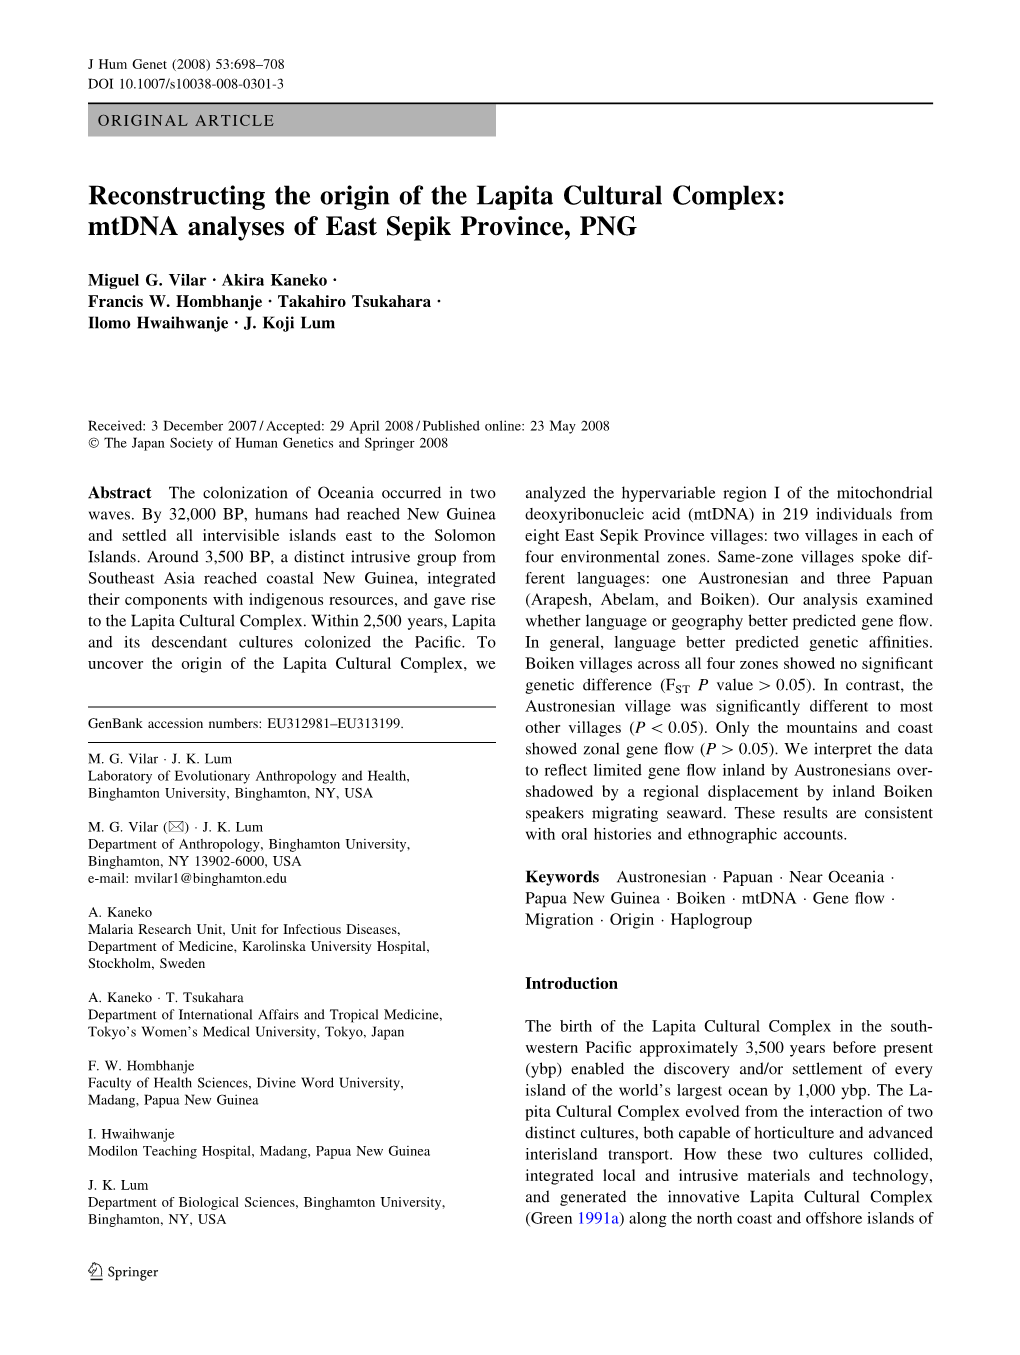 Reconstructing the Origin of the Lapita Cultural Complex: Mtdna Analyses of East Sepik Province, PNG